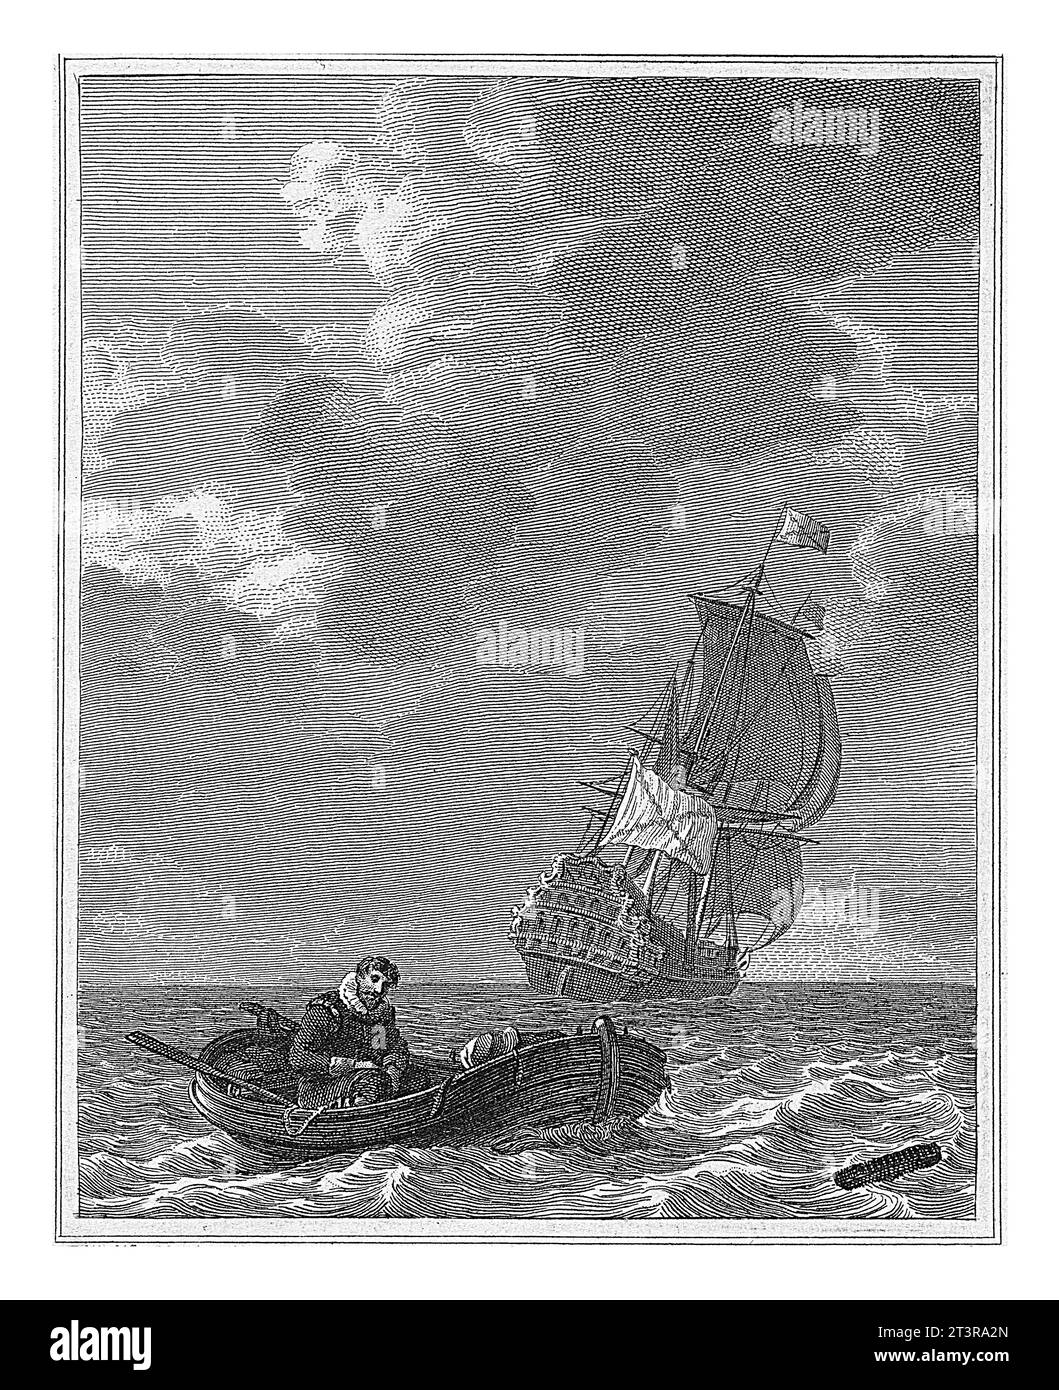 Man in a rowing boat with a sailing ship in the background, Philippus Velijn, after Johannes Hermanus Koekkoek, 1830 A man in a rowing boat on the ope Stock Photo